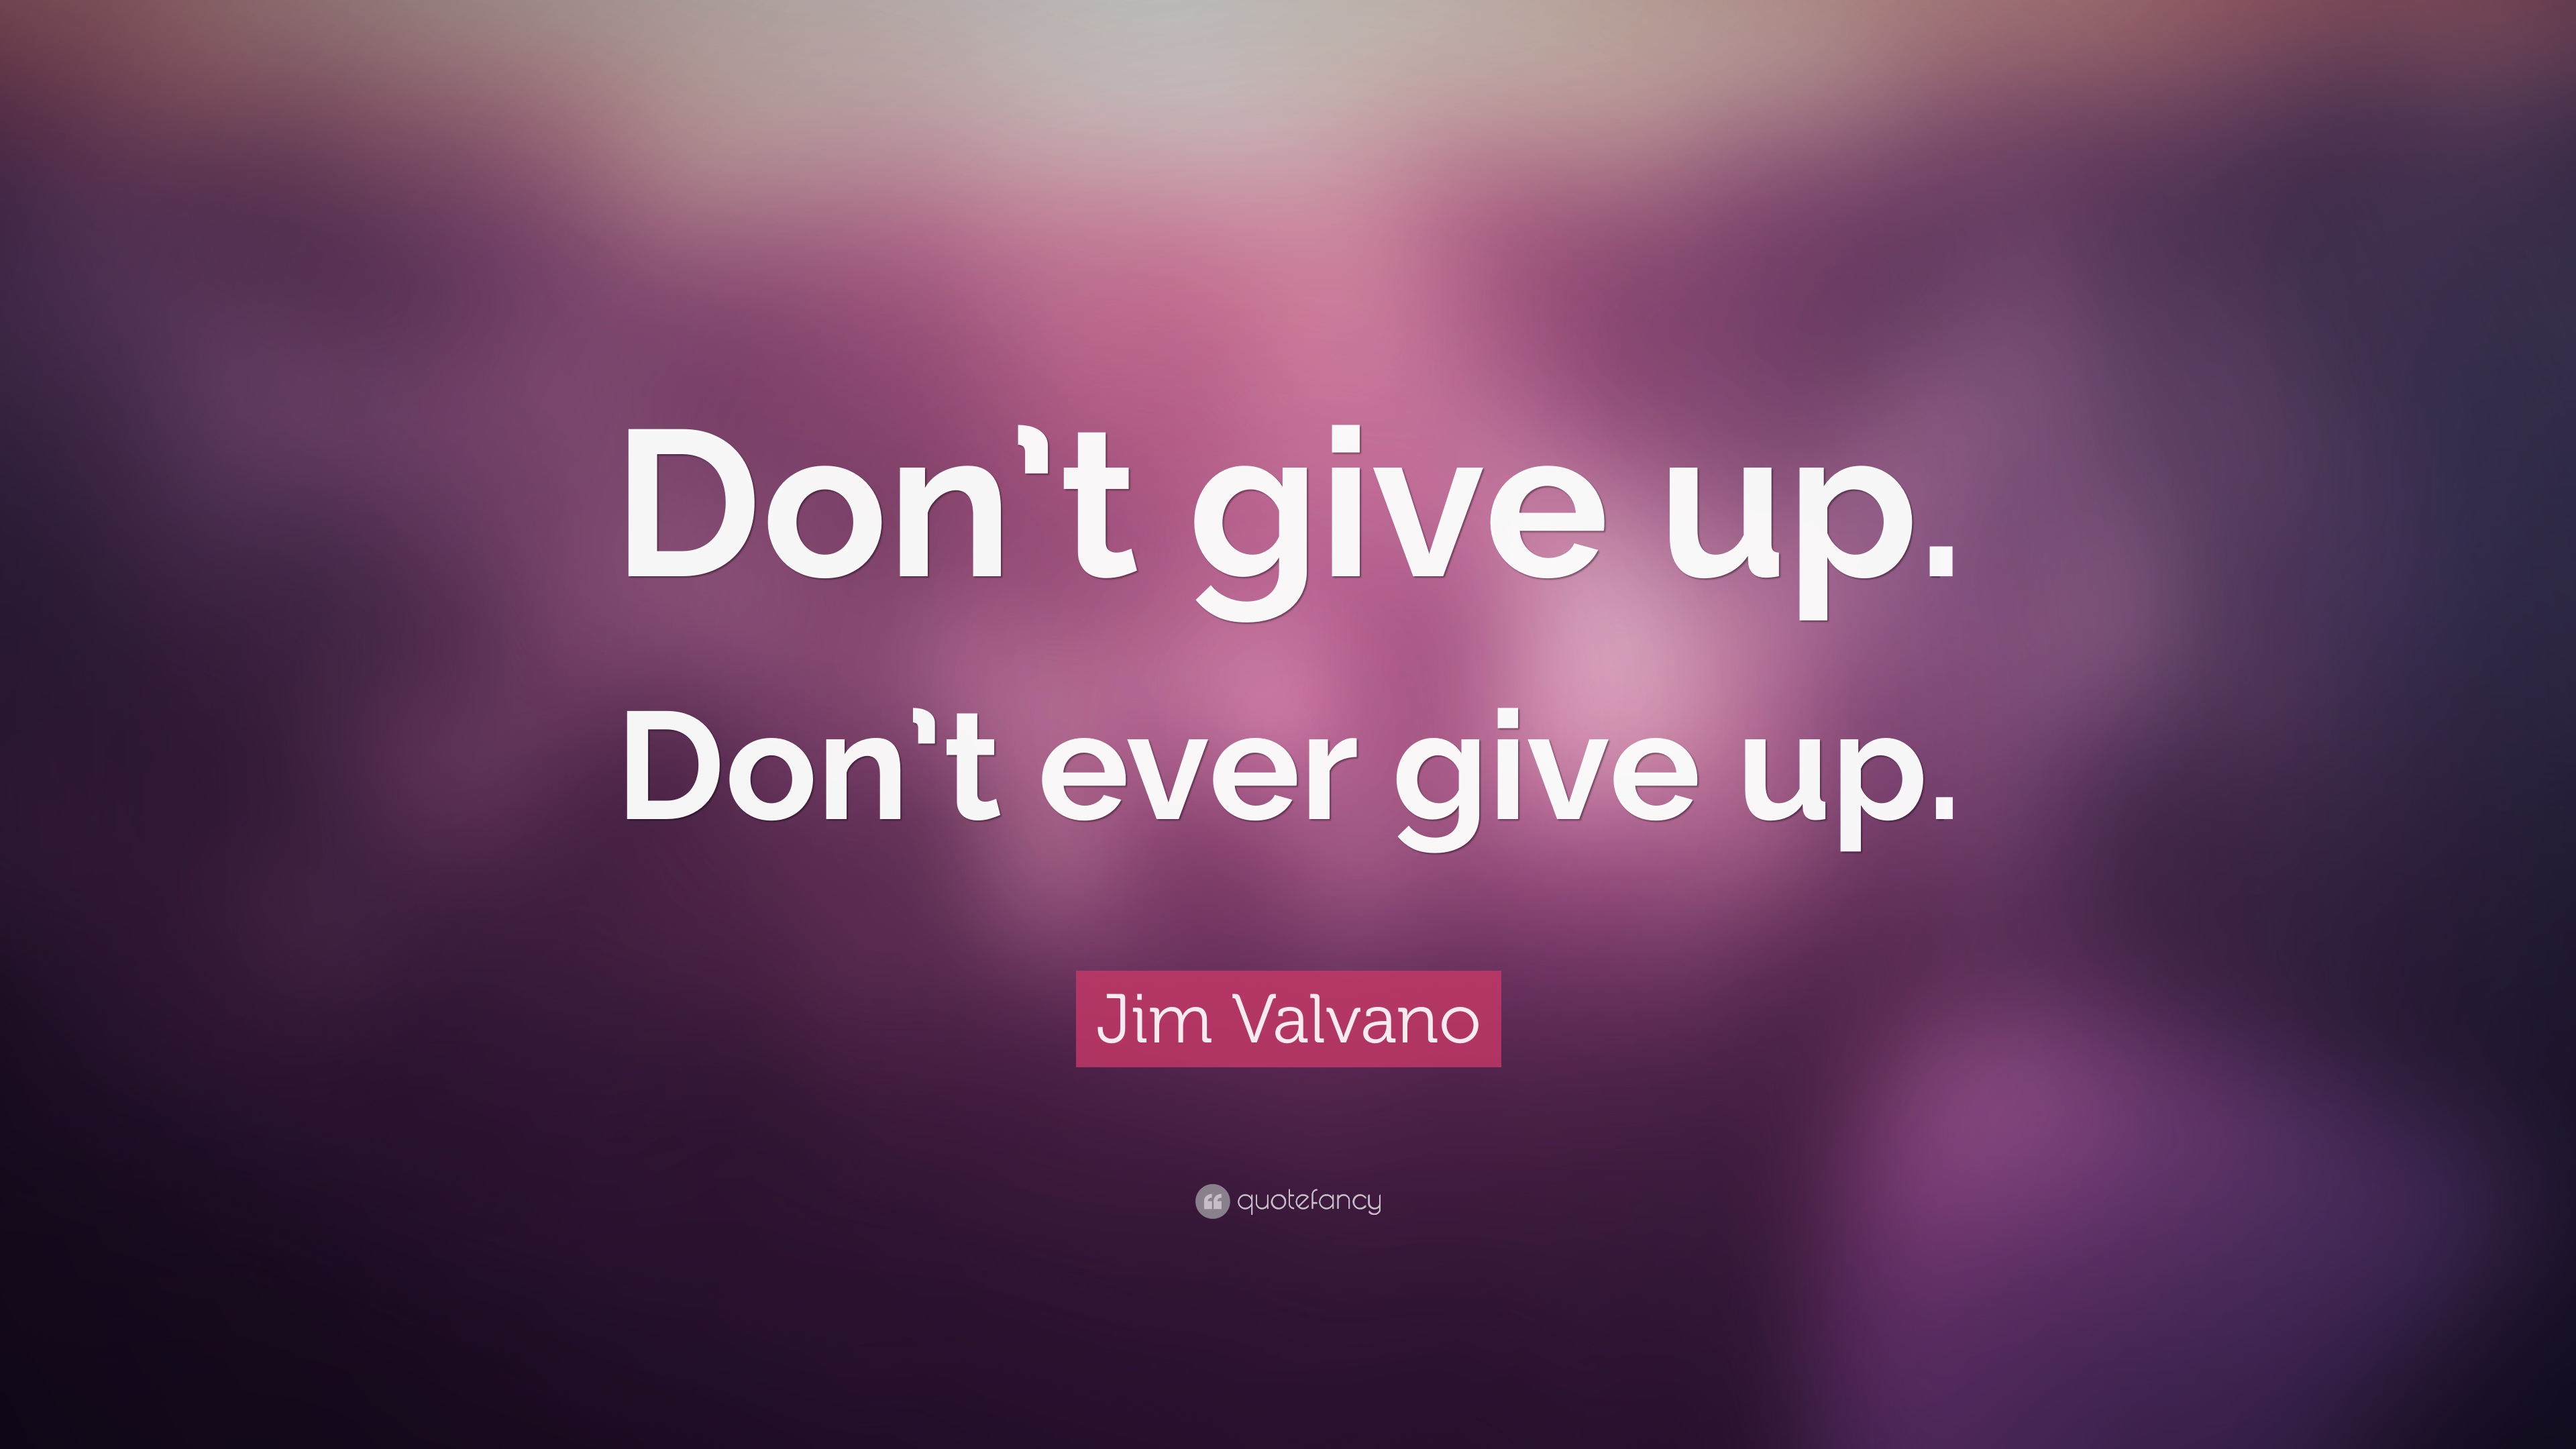 Jim Valvano Quote Dont give up. Dont ever give up. 9